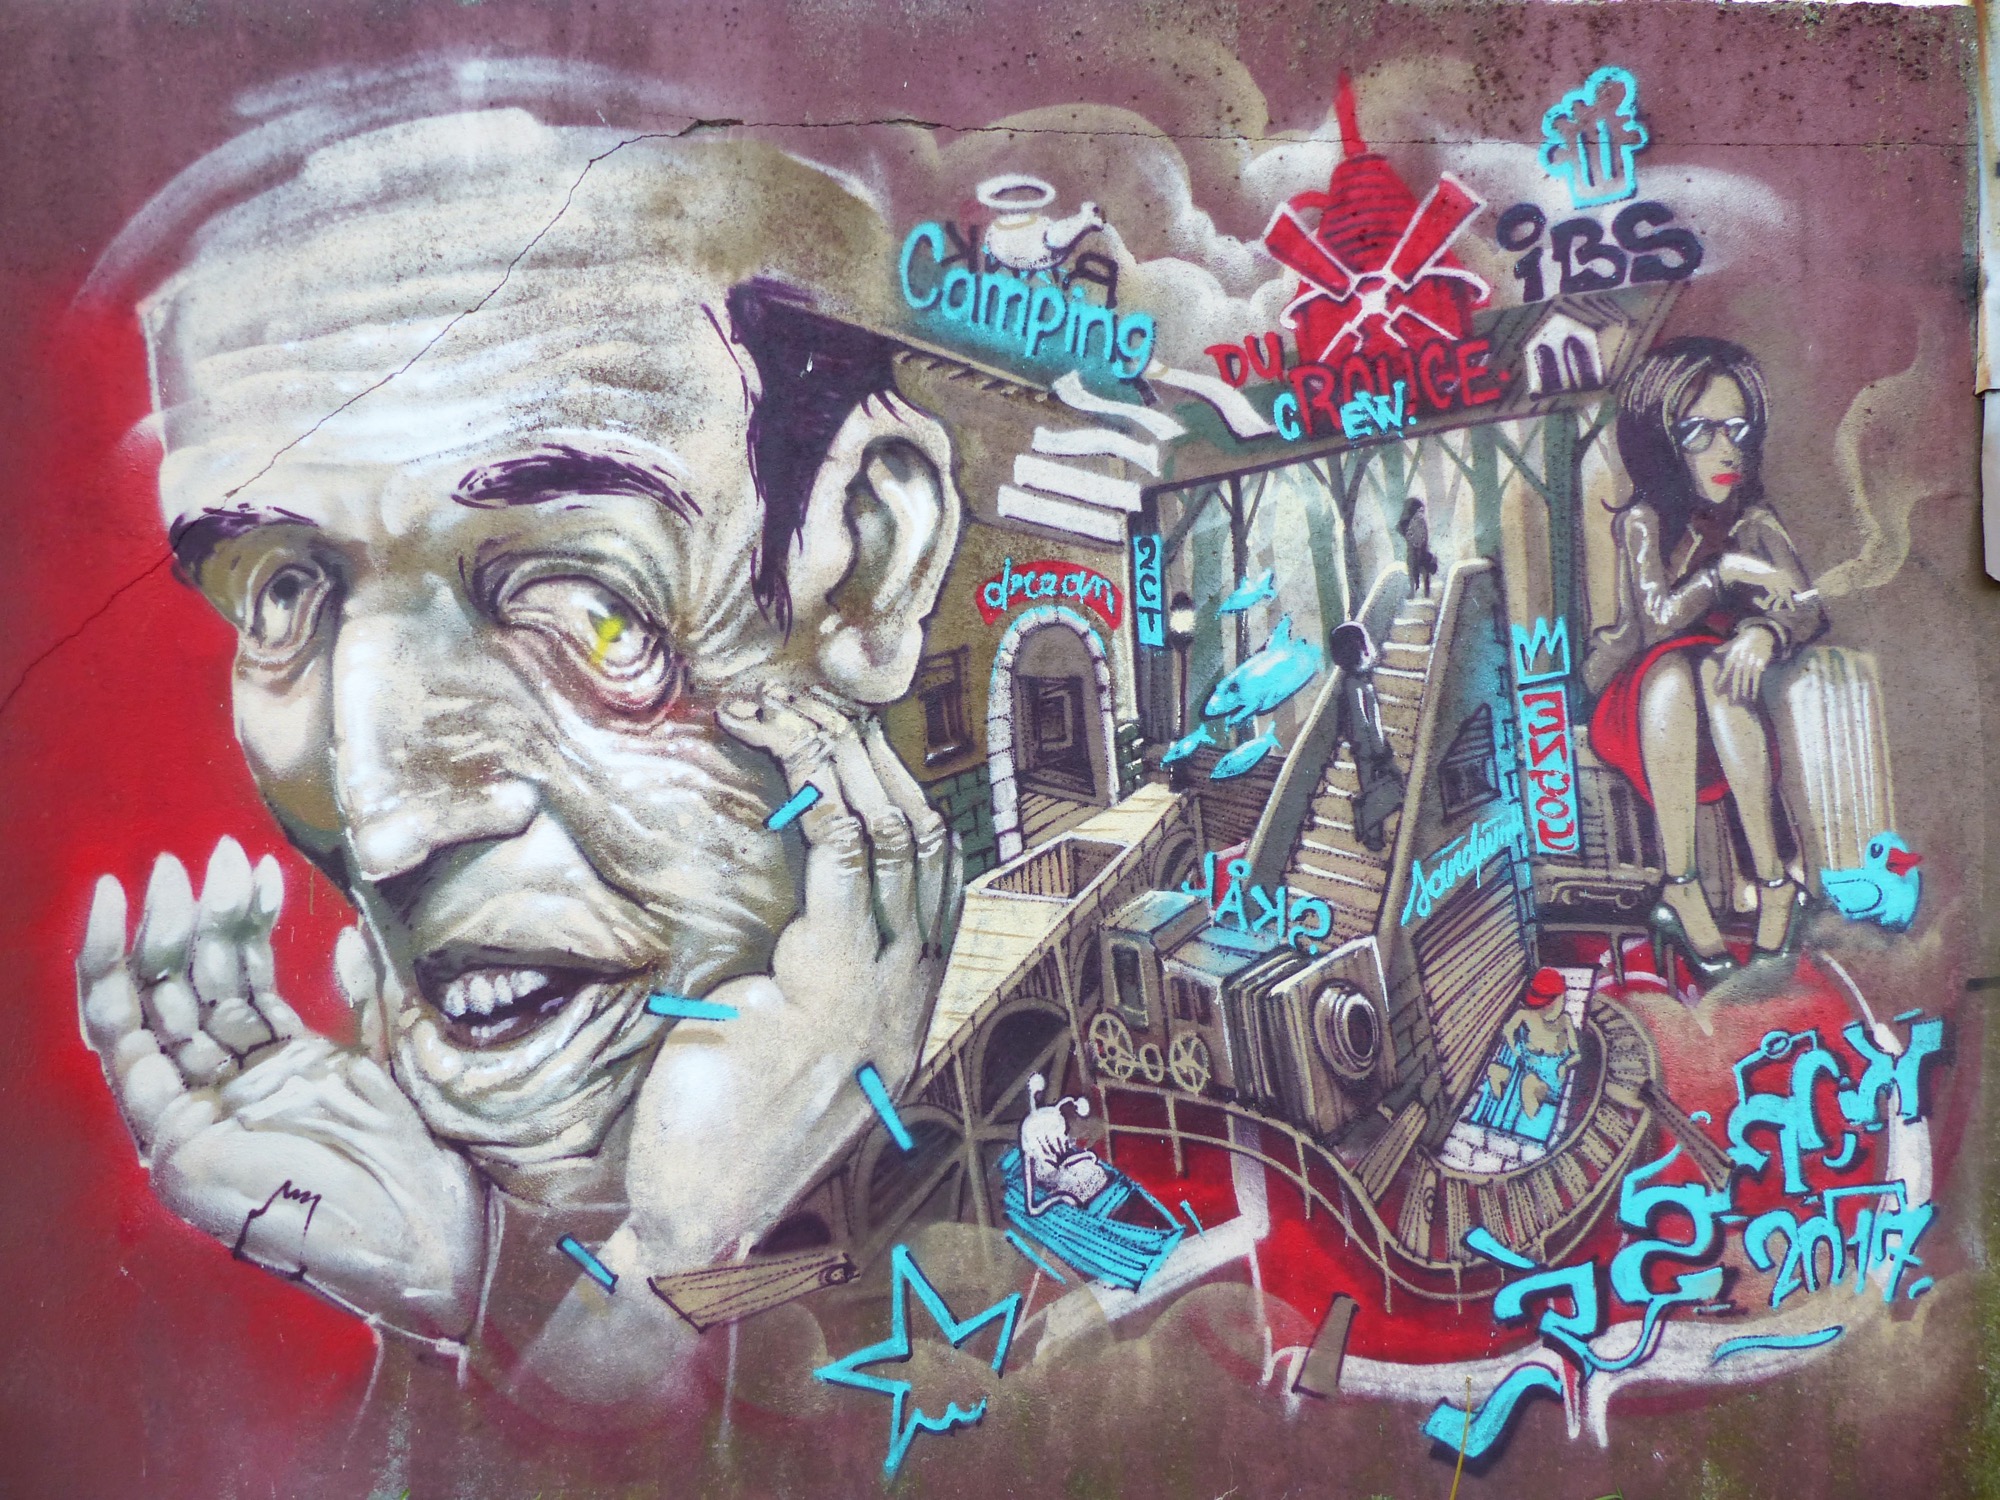 Graffiti 18  captured by Rabot in Nantes France